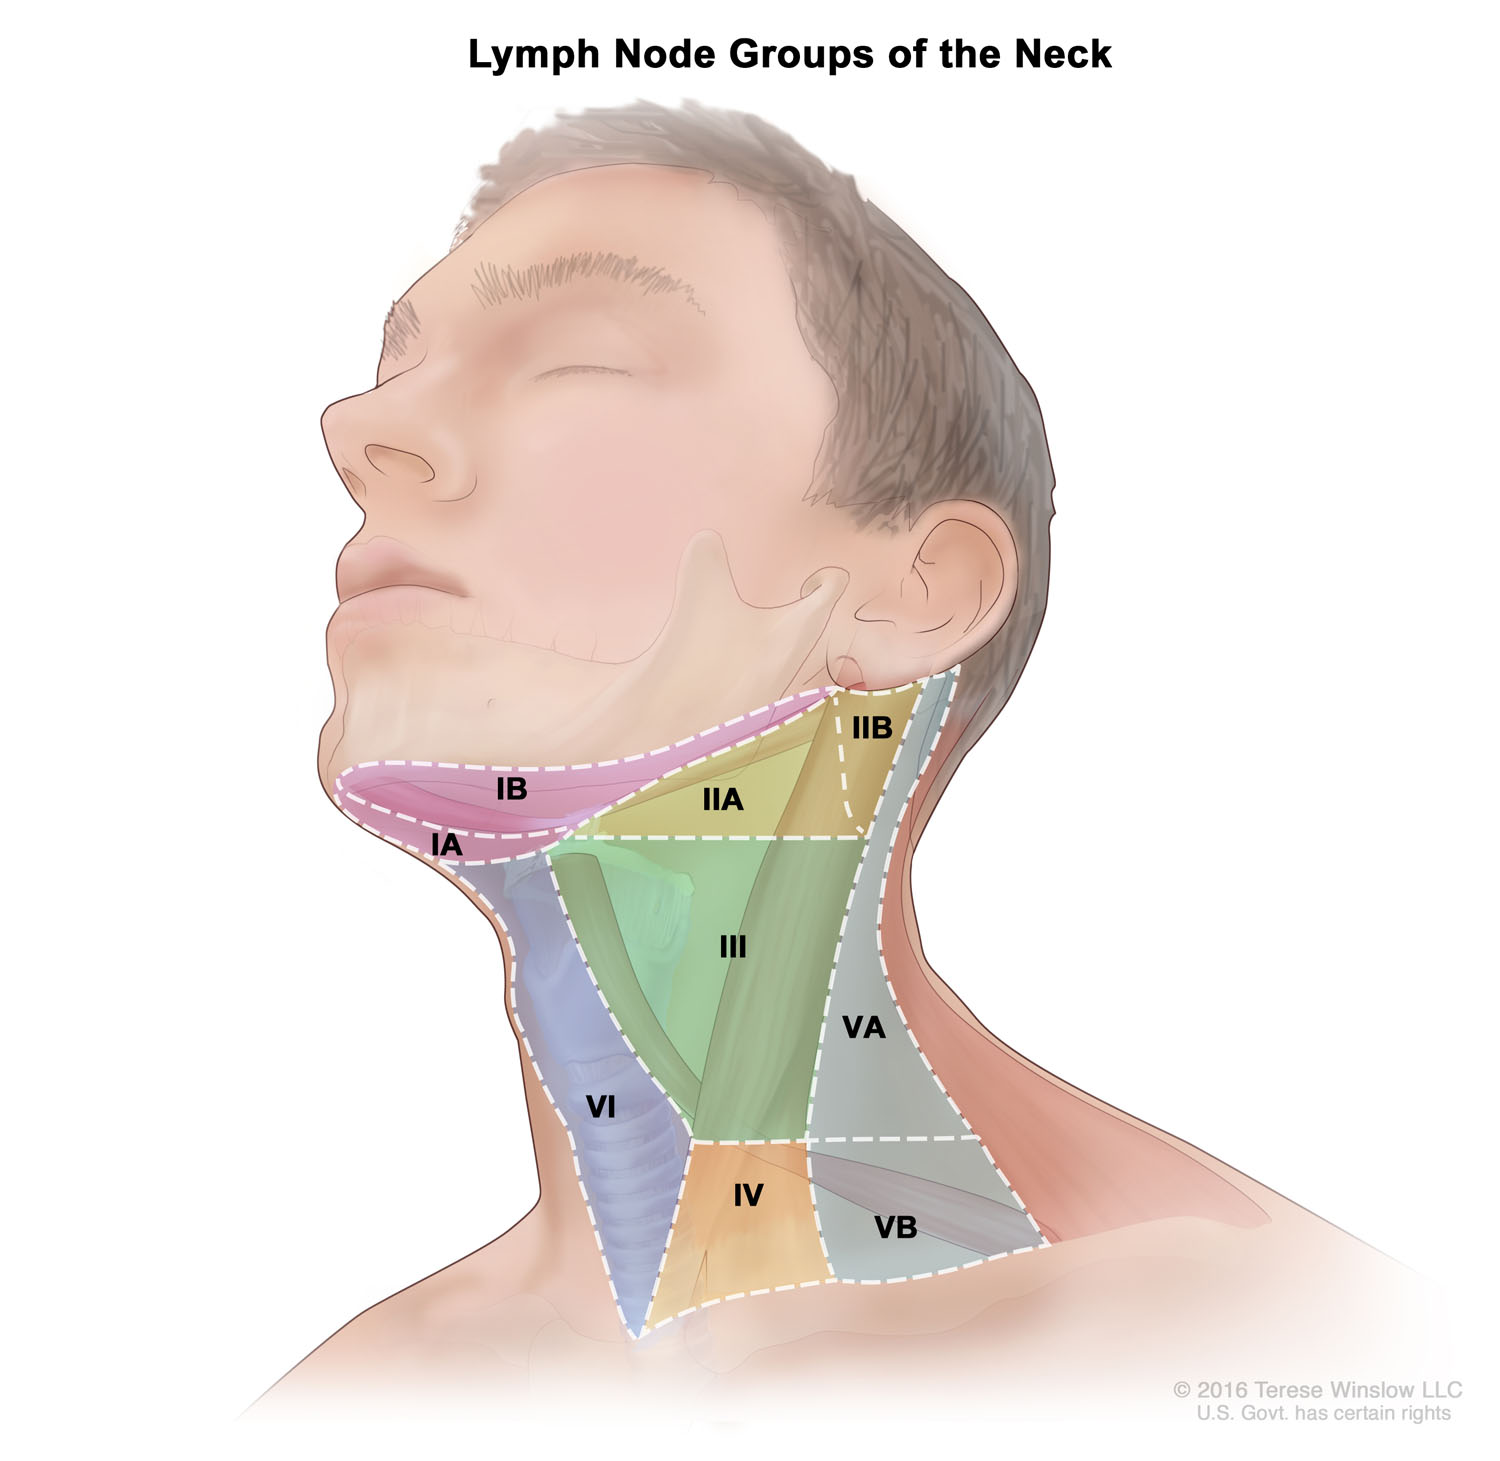 Lymph Node Groups of the Neck